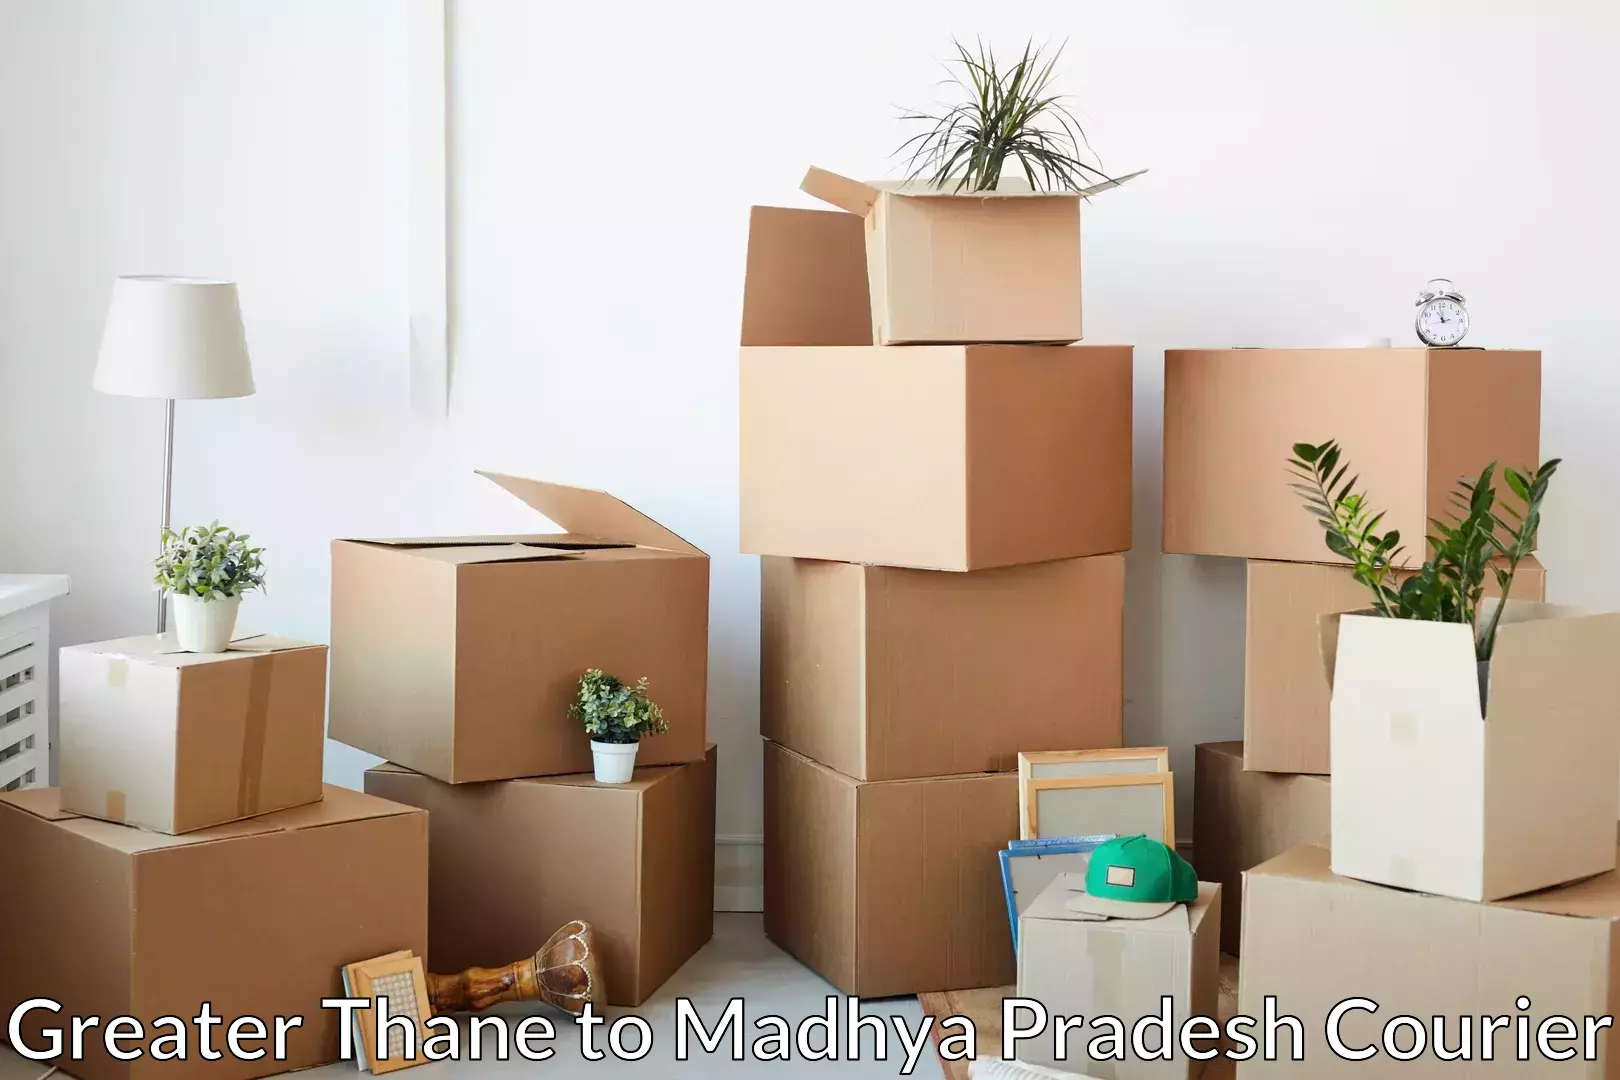 Trusted furniture movers Greater Thane to Mundi